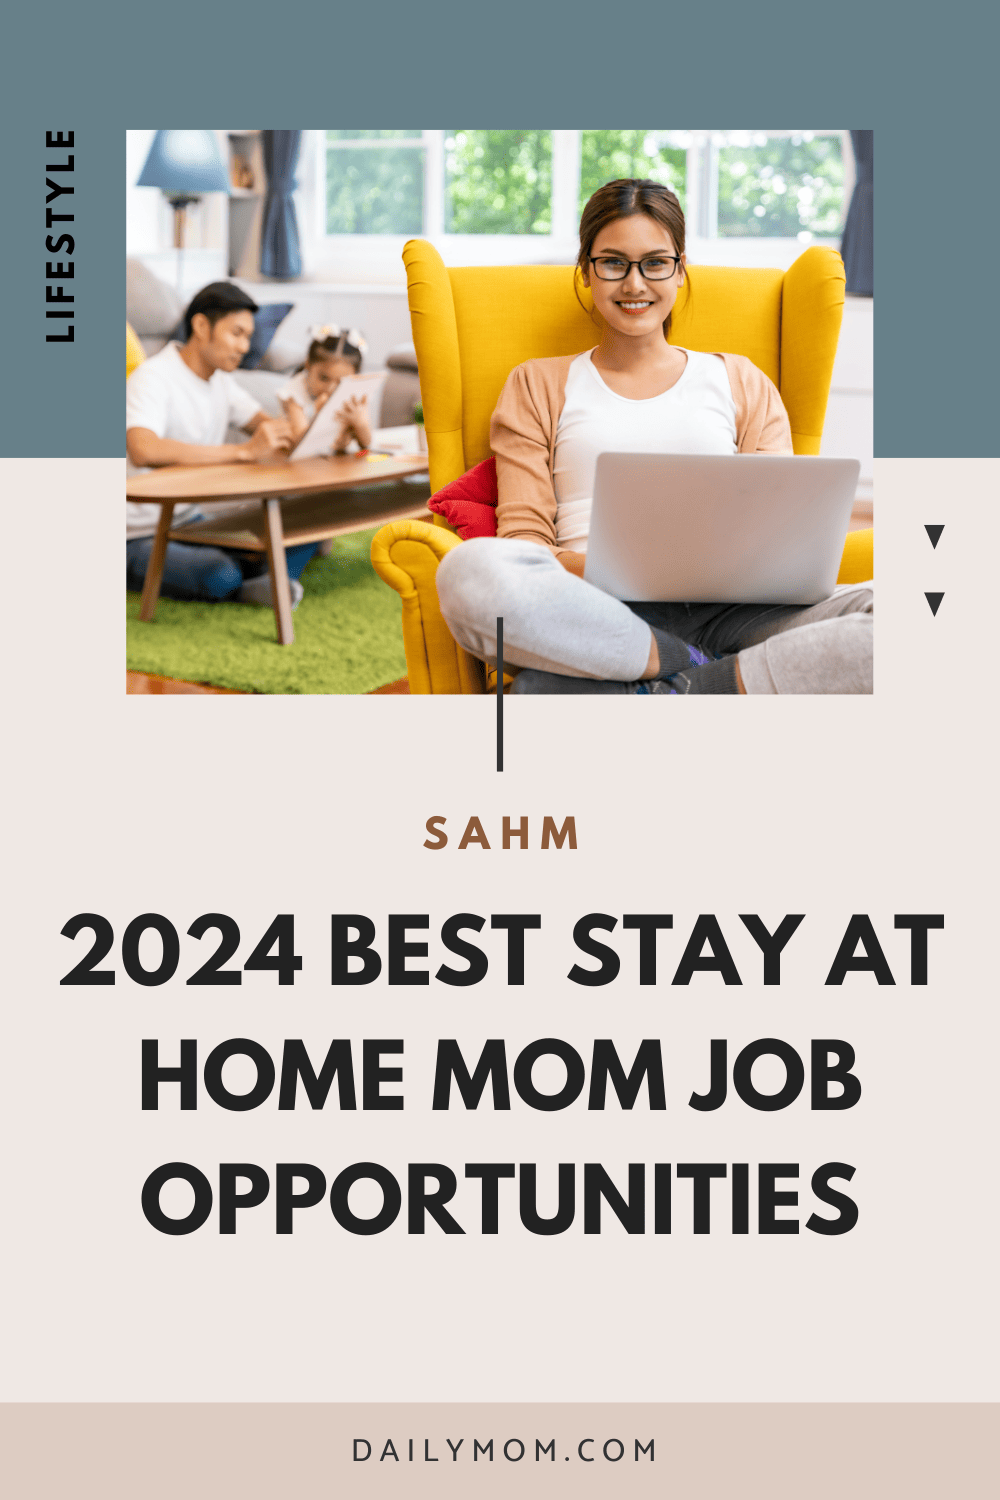 Daily Mom Parent Portal Stay At Home Mom Job Opportunities